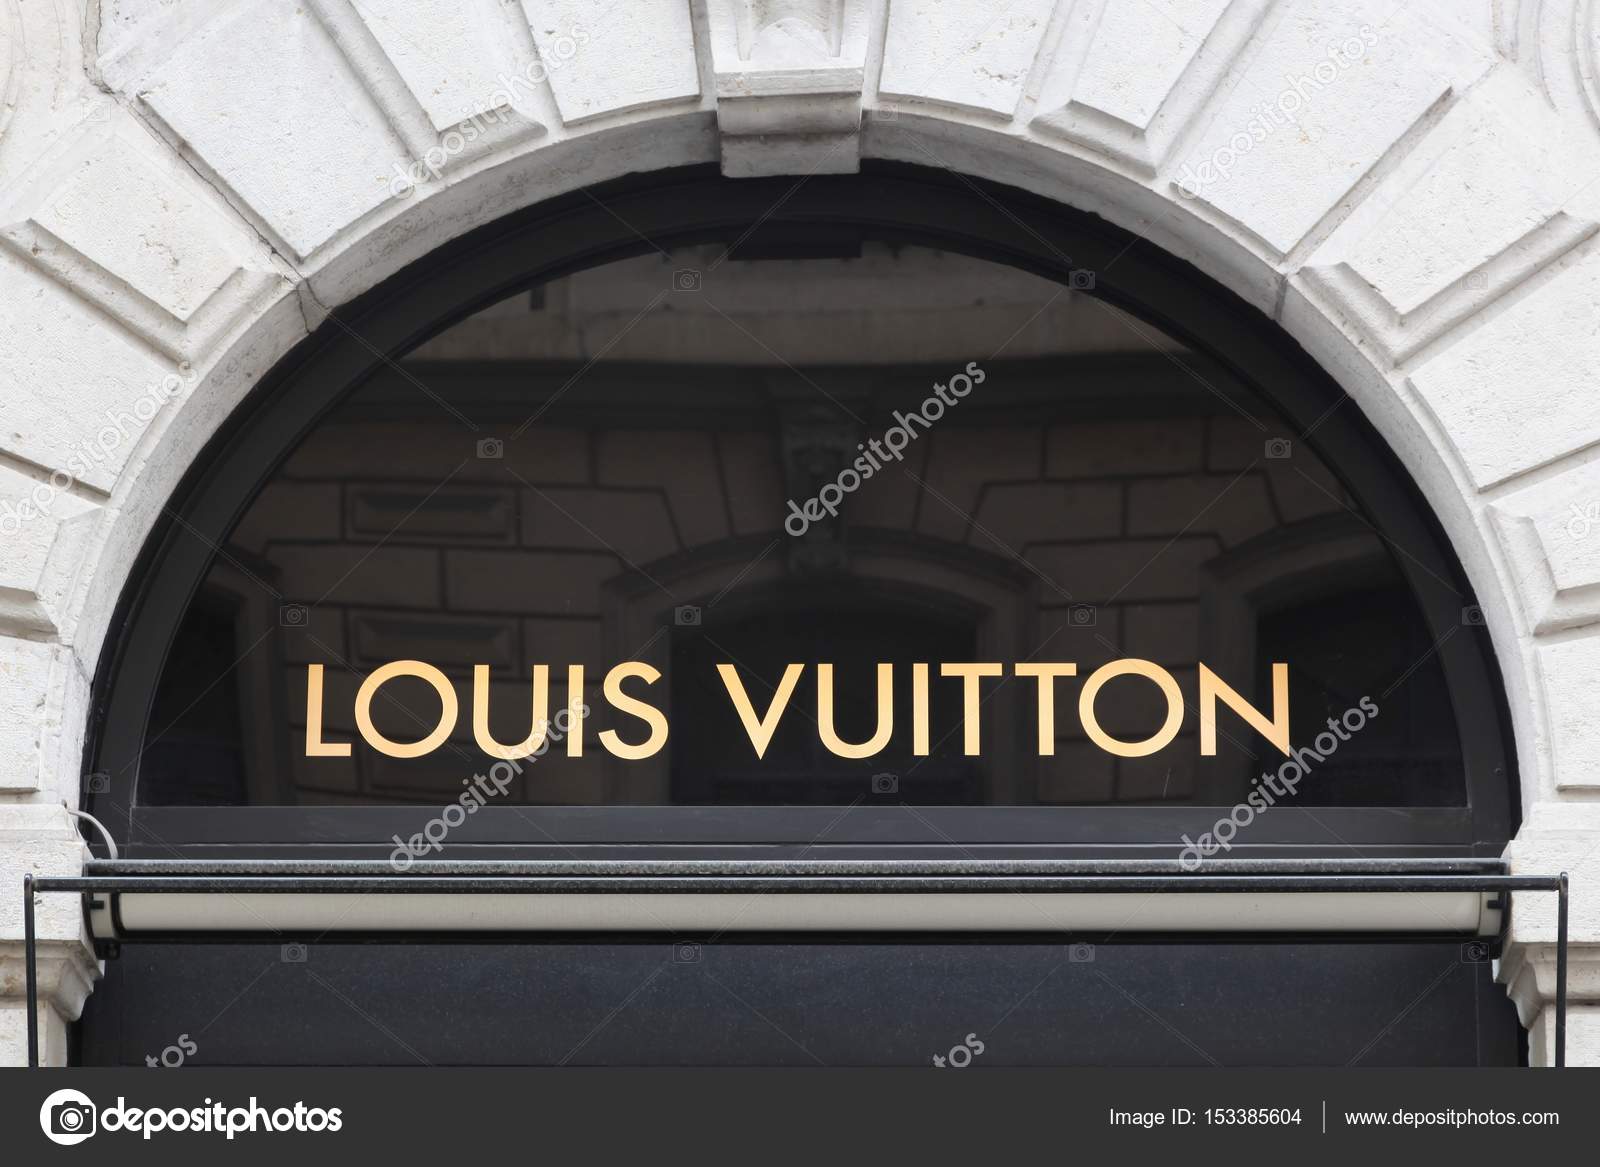 Louis Vuitton logo sign attached to the wall